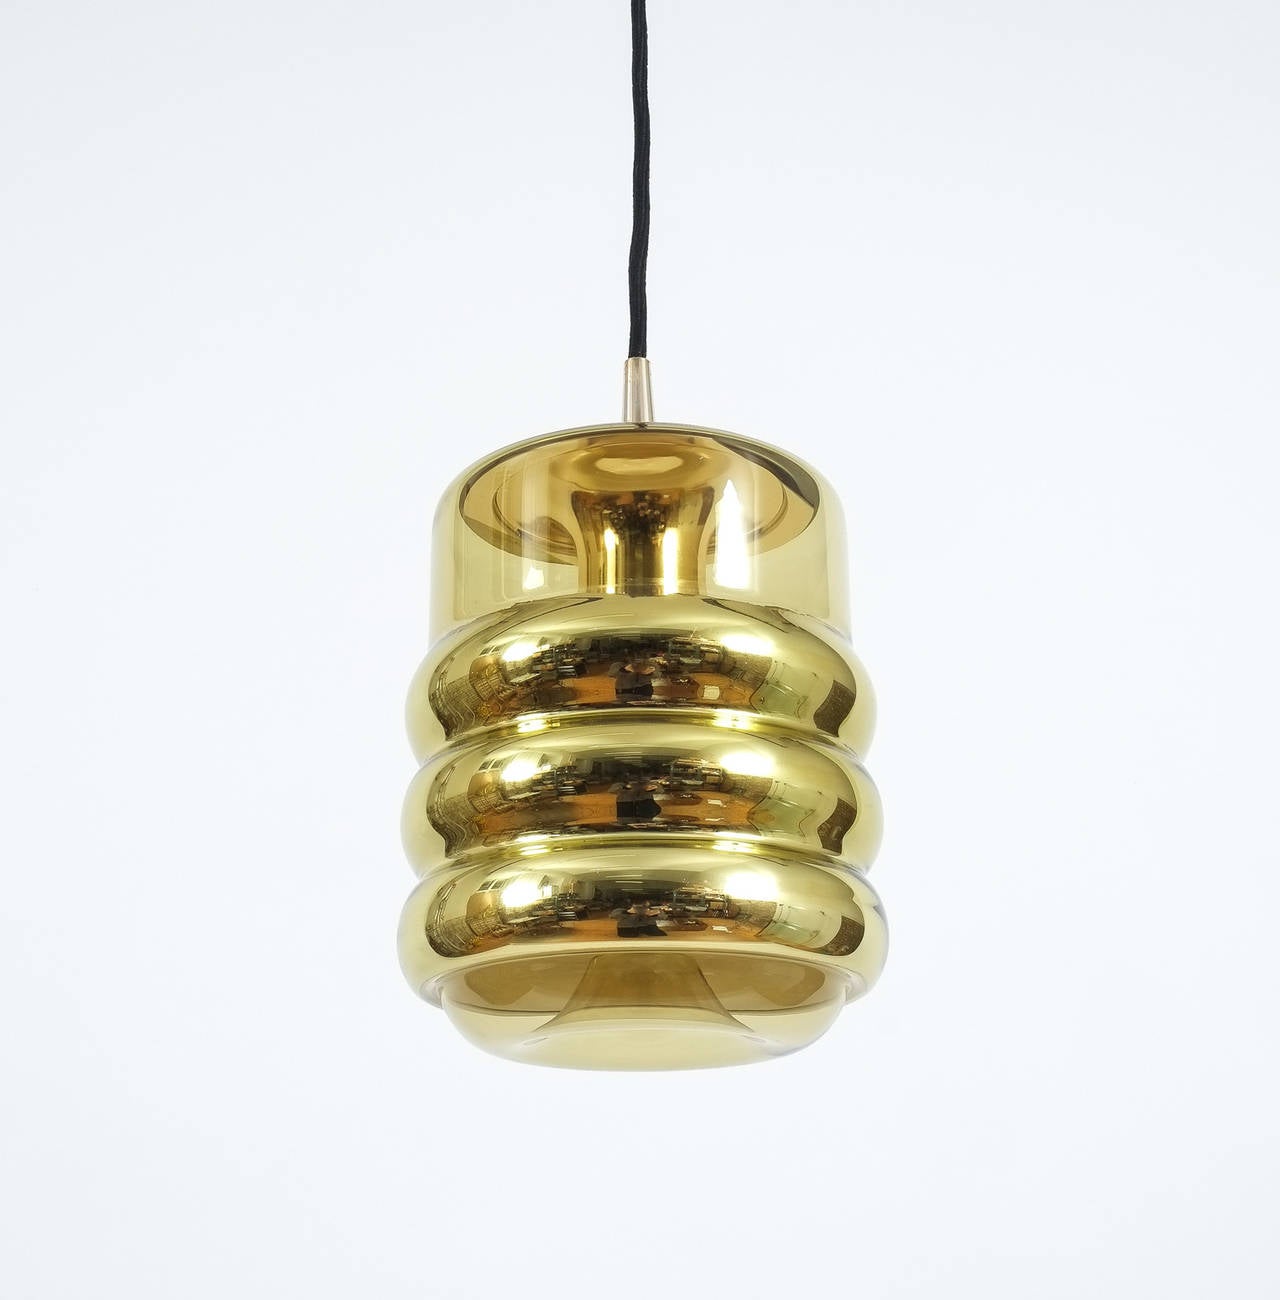 Nice glass pendant by Staff or Germany featuring slightly yellowish glass with a golden metallized mirror effect. Each light takes up to 75W. The cord wire can be adjusted in length according to your requirements.